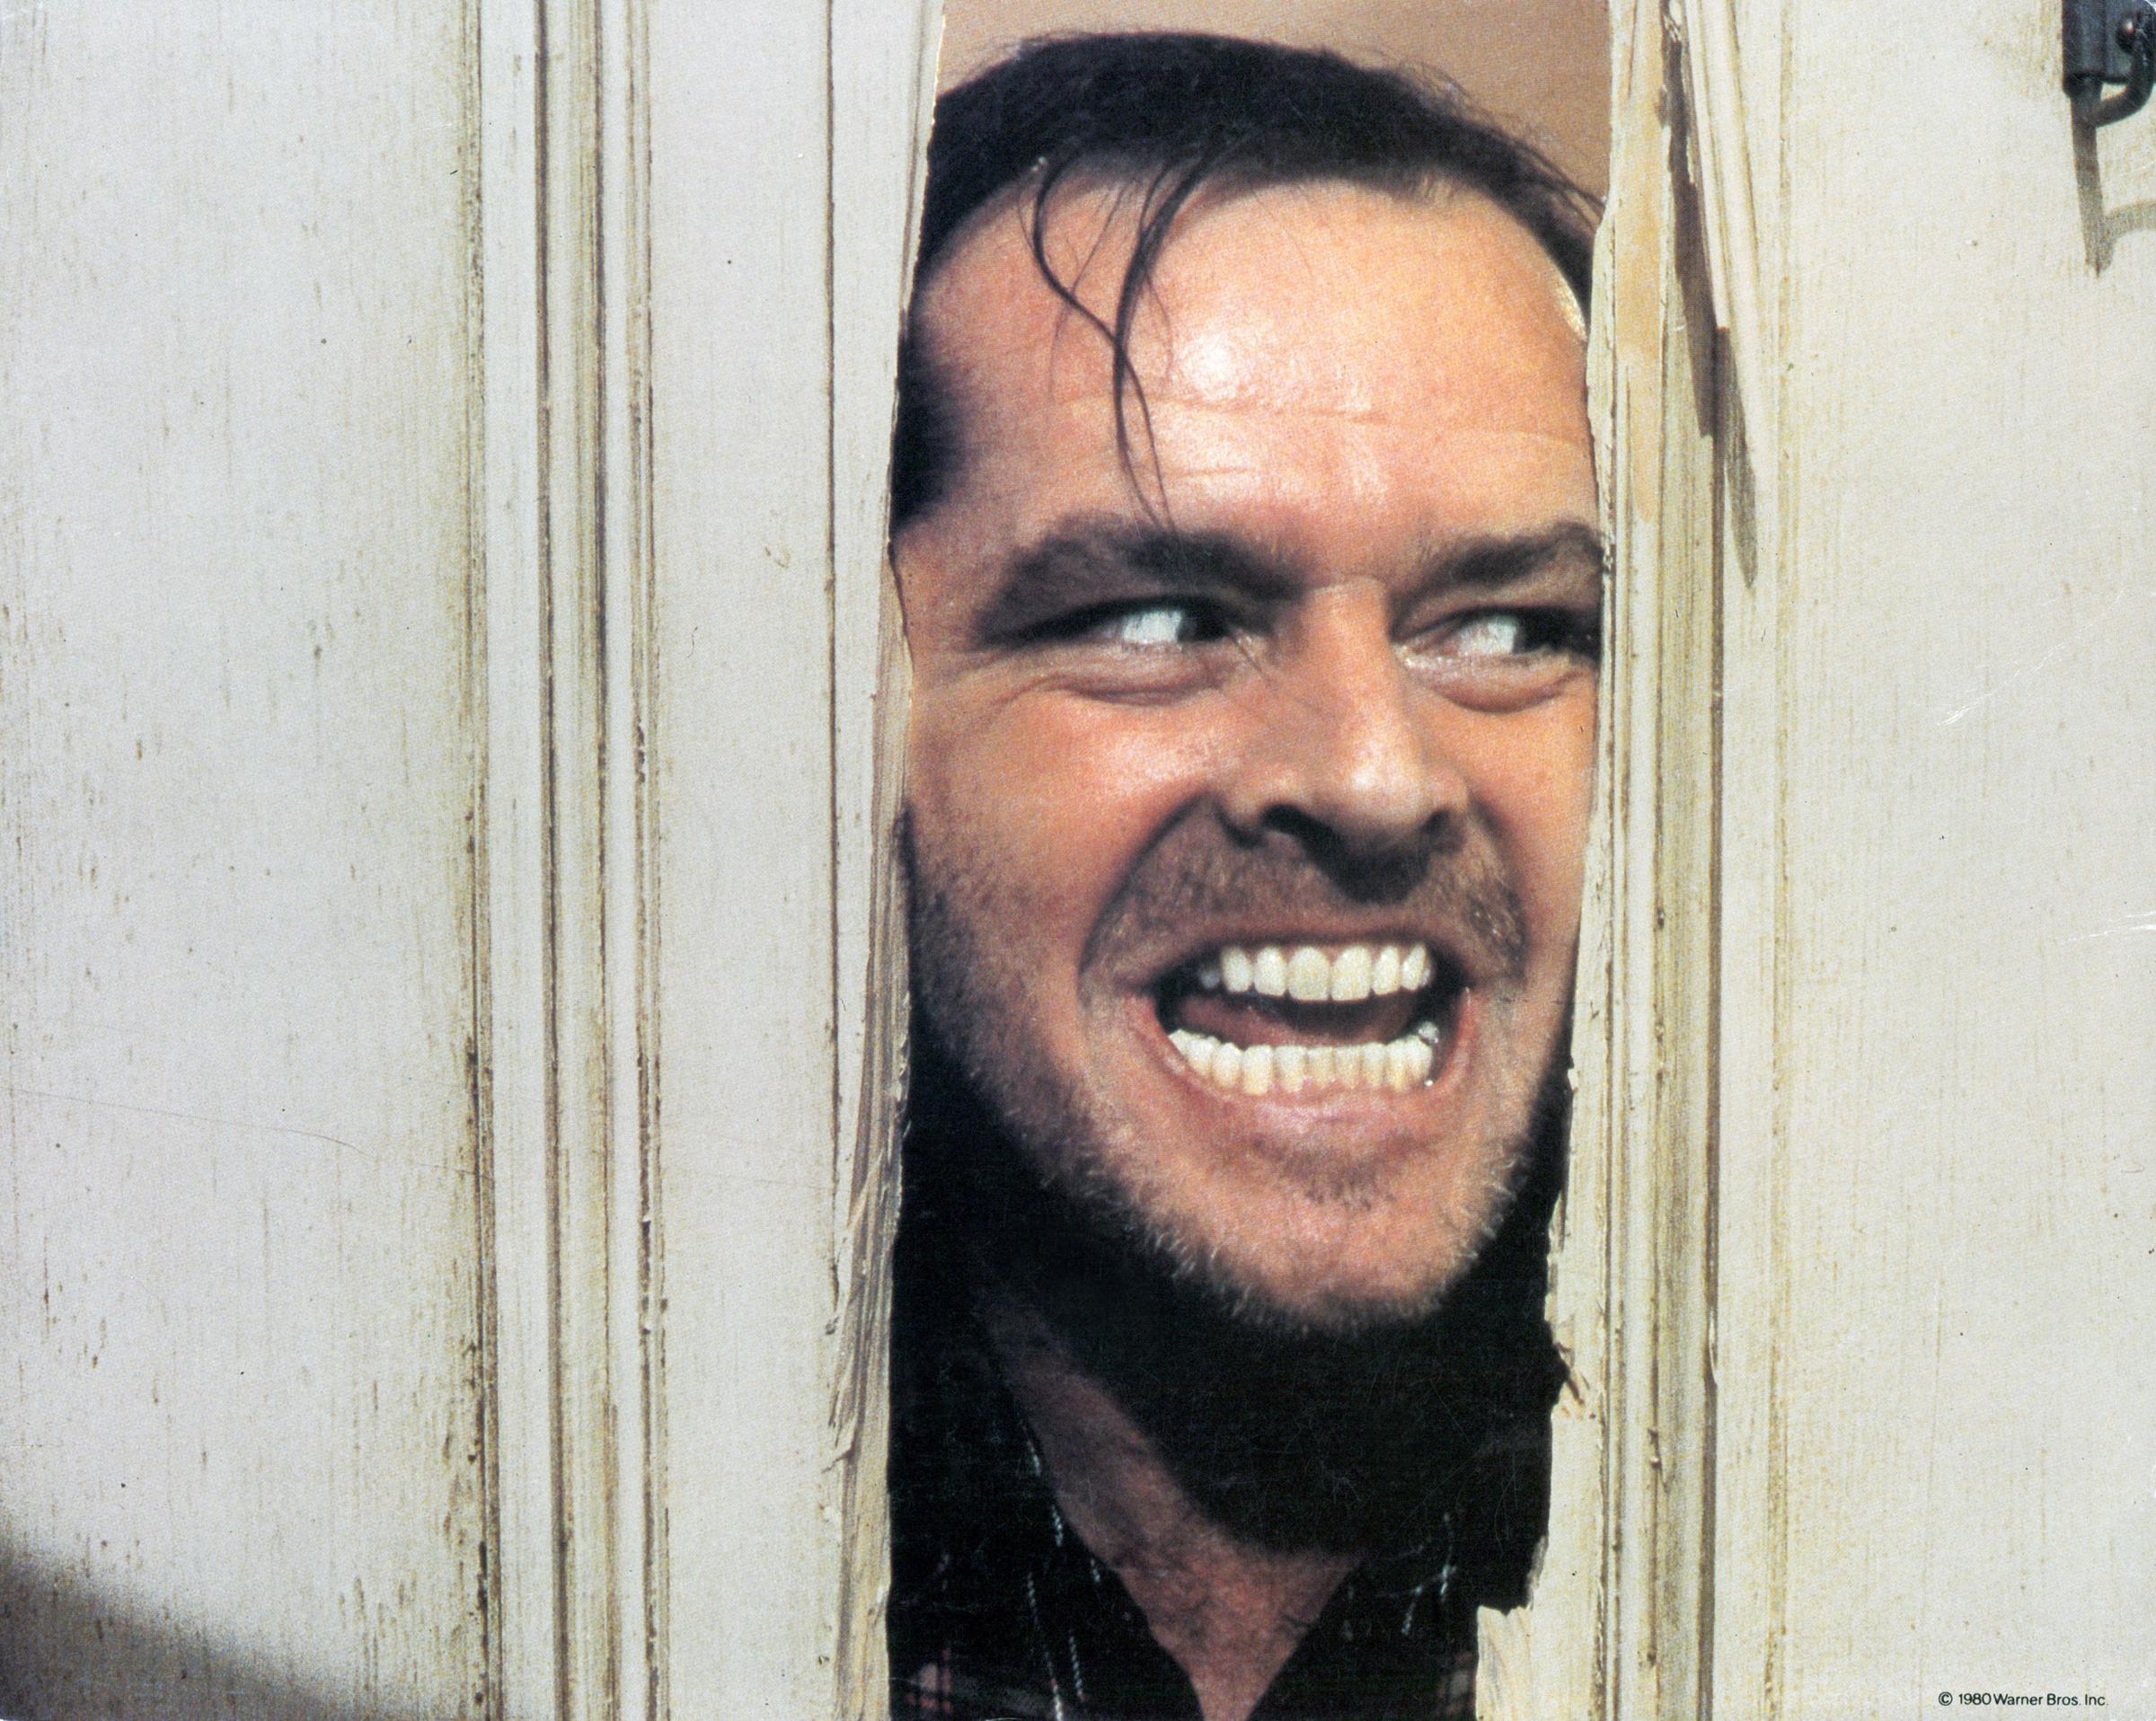 Jack Nicholson on the set of "The Shining," 1980 | Source: Getty Images